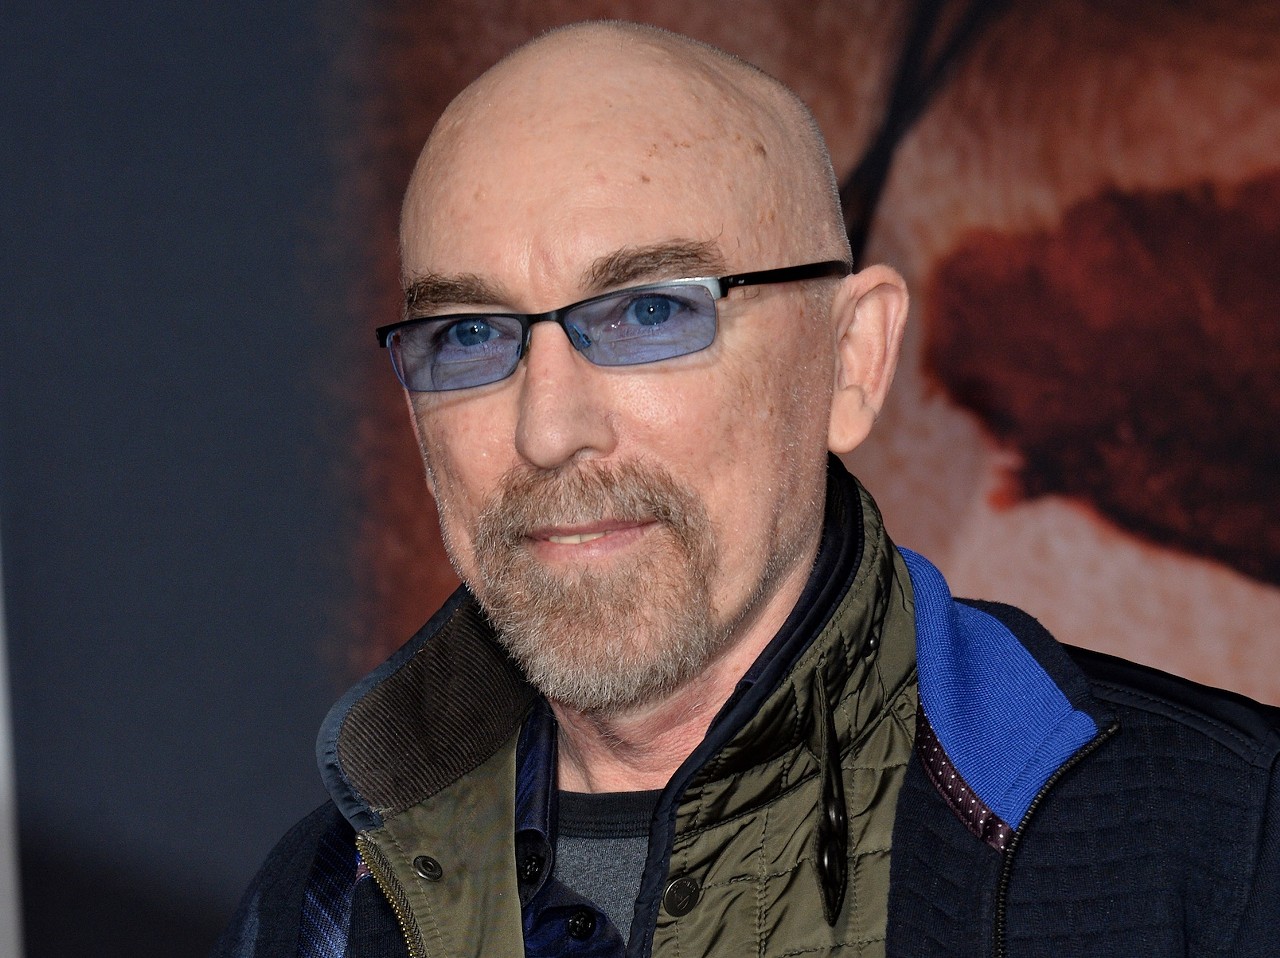 Jackie Earle Haley
Character actor Jackie Earle Haley, known for Bad News Bears and Watchmen, moved to San Antonio after getting married. He owns a production company here.